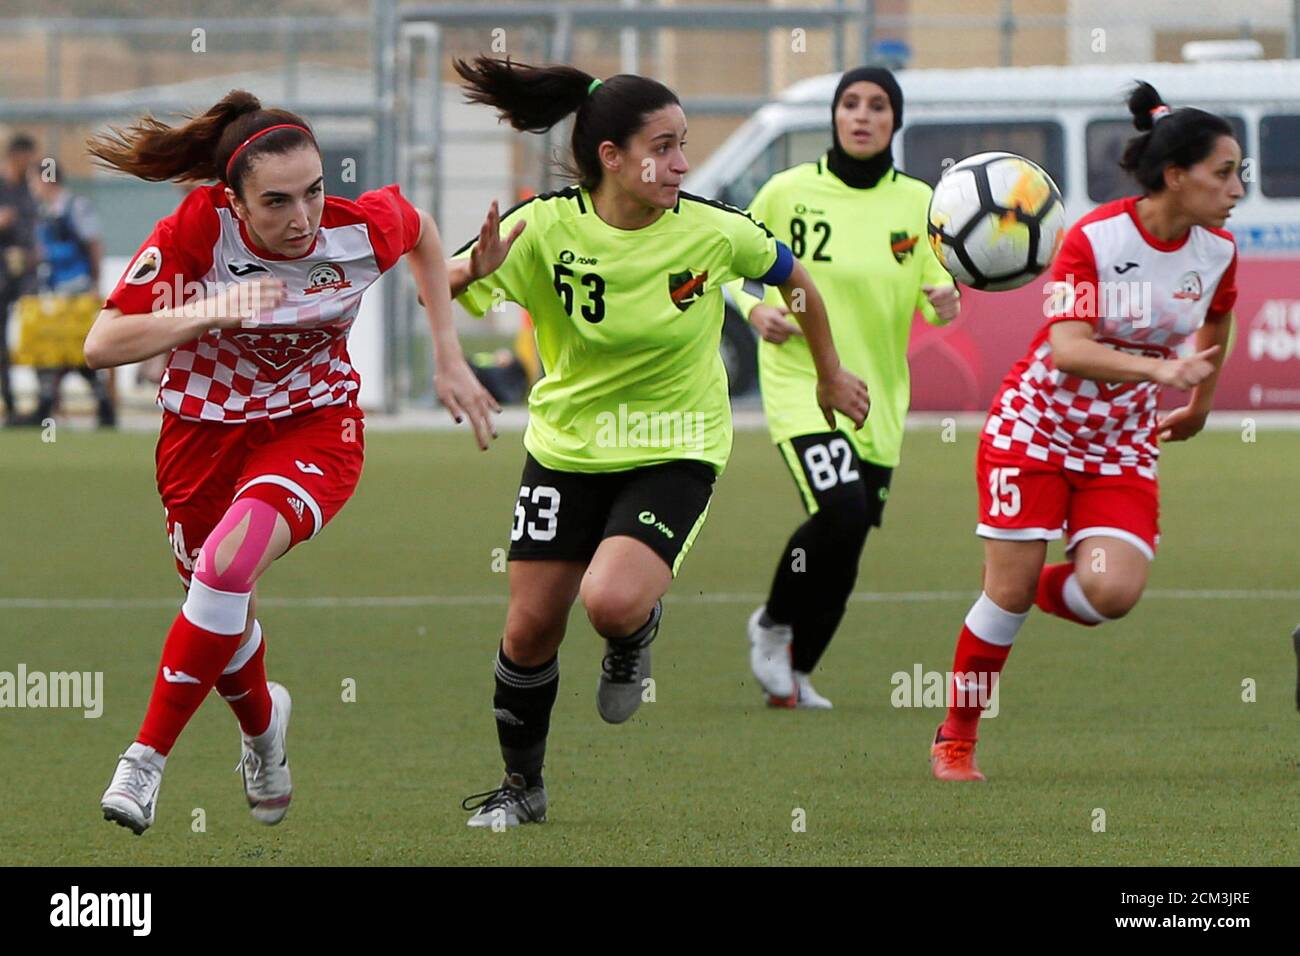 Players of Shabab Al-Ordon Club fight for the ball with Al Ahli Club  players during their Jordan Women's Pro League soccer match in Amman, Jordan,  June 8, 2019.REUTERS/Muhammad Hamed Stock Photo -